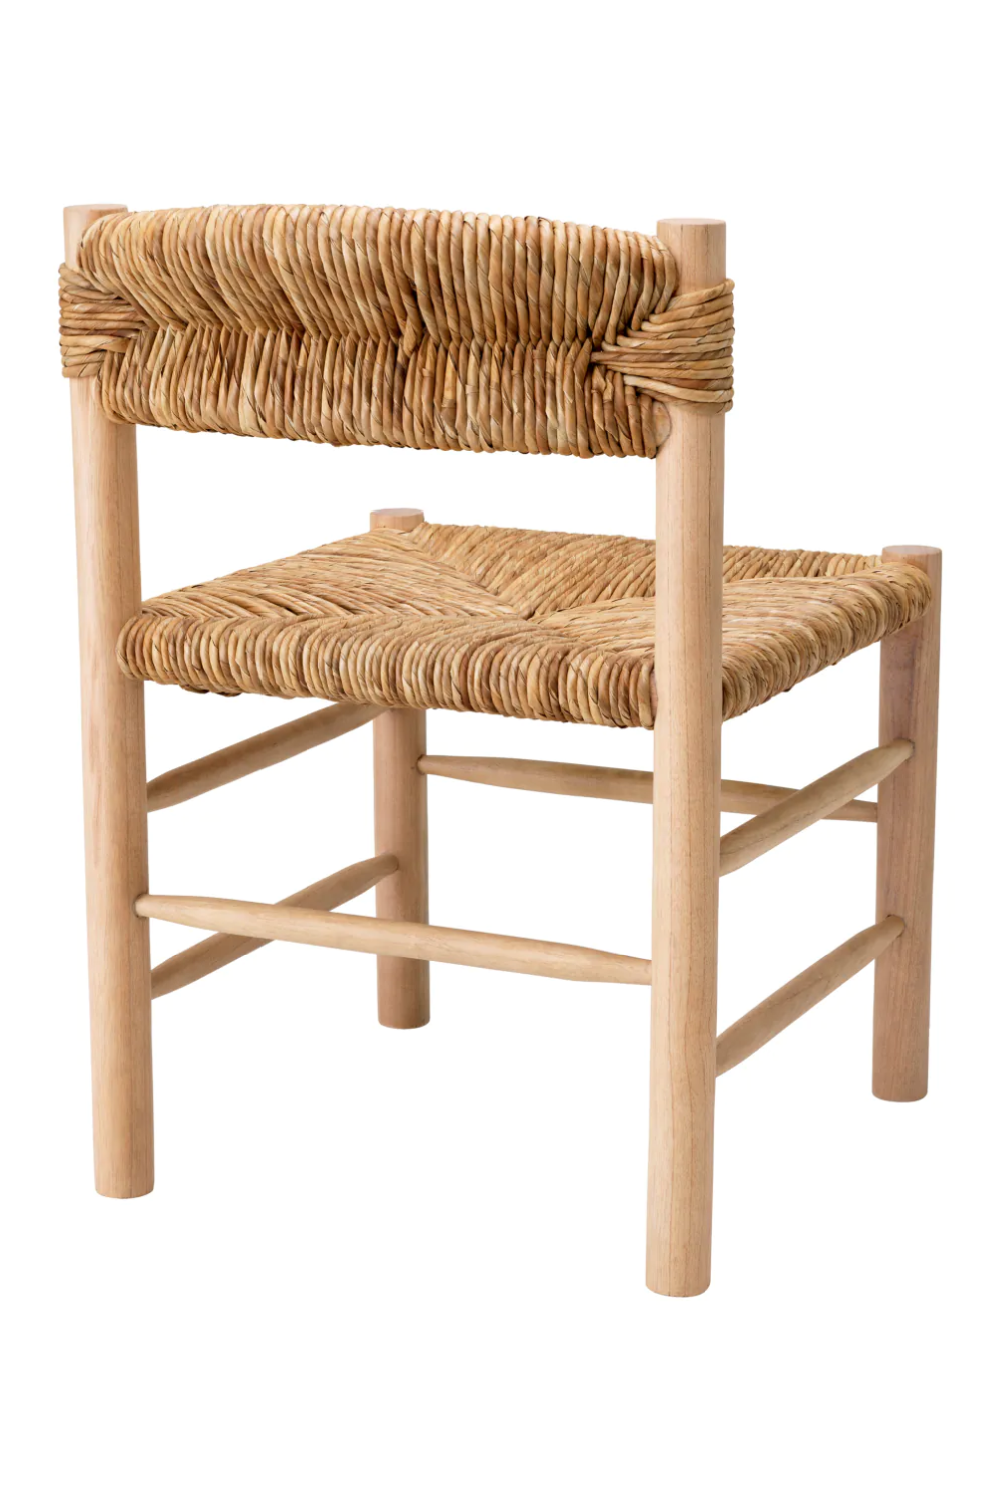 Woven Seagrass Dining Chair | Eichholtz Cosby | Oroa.com